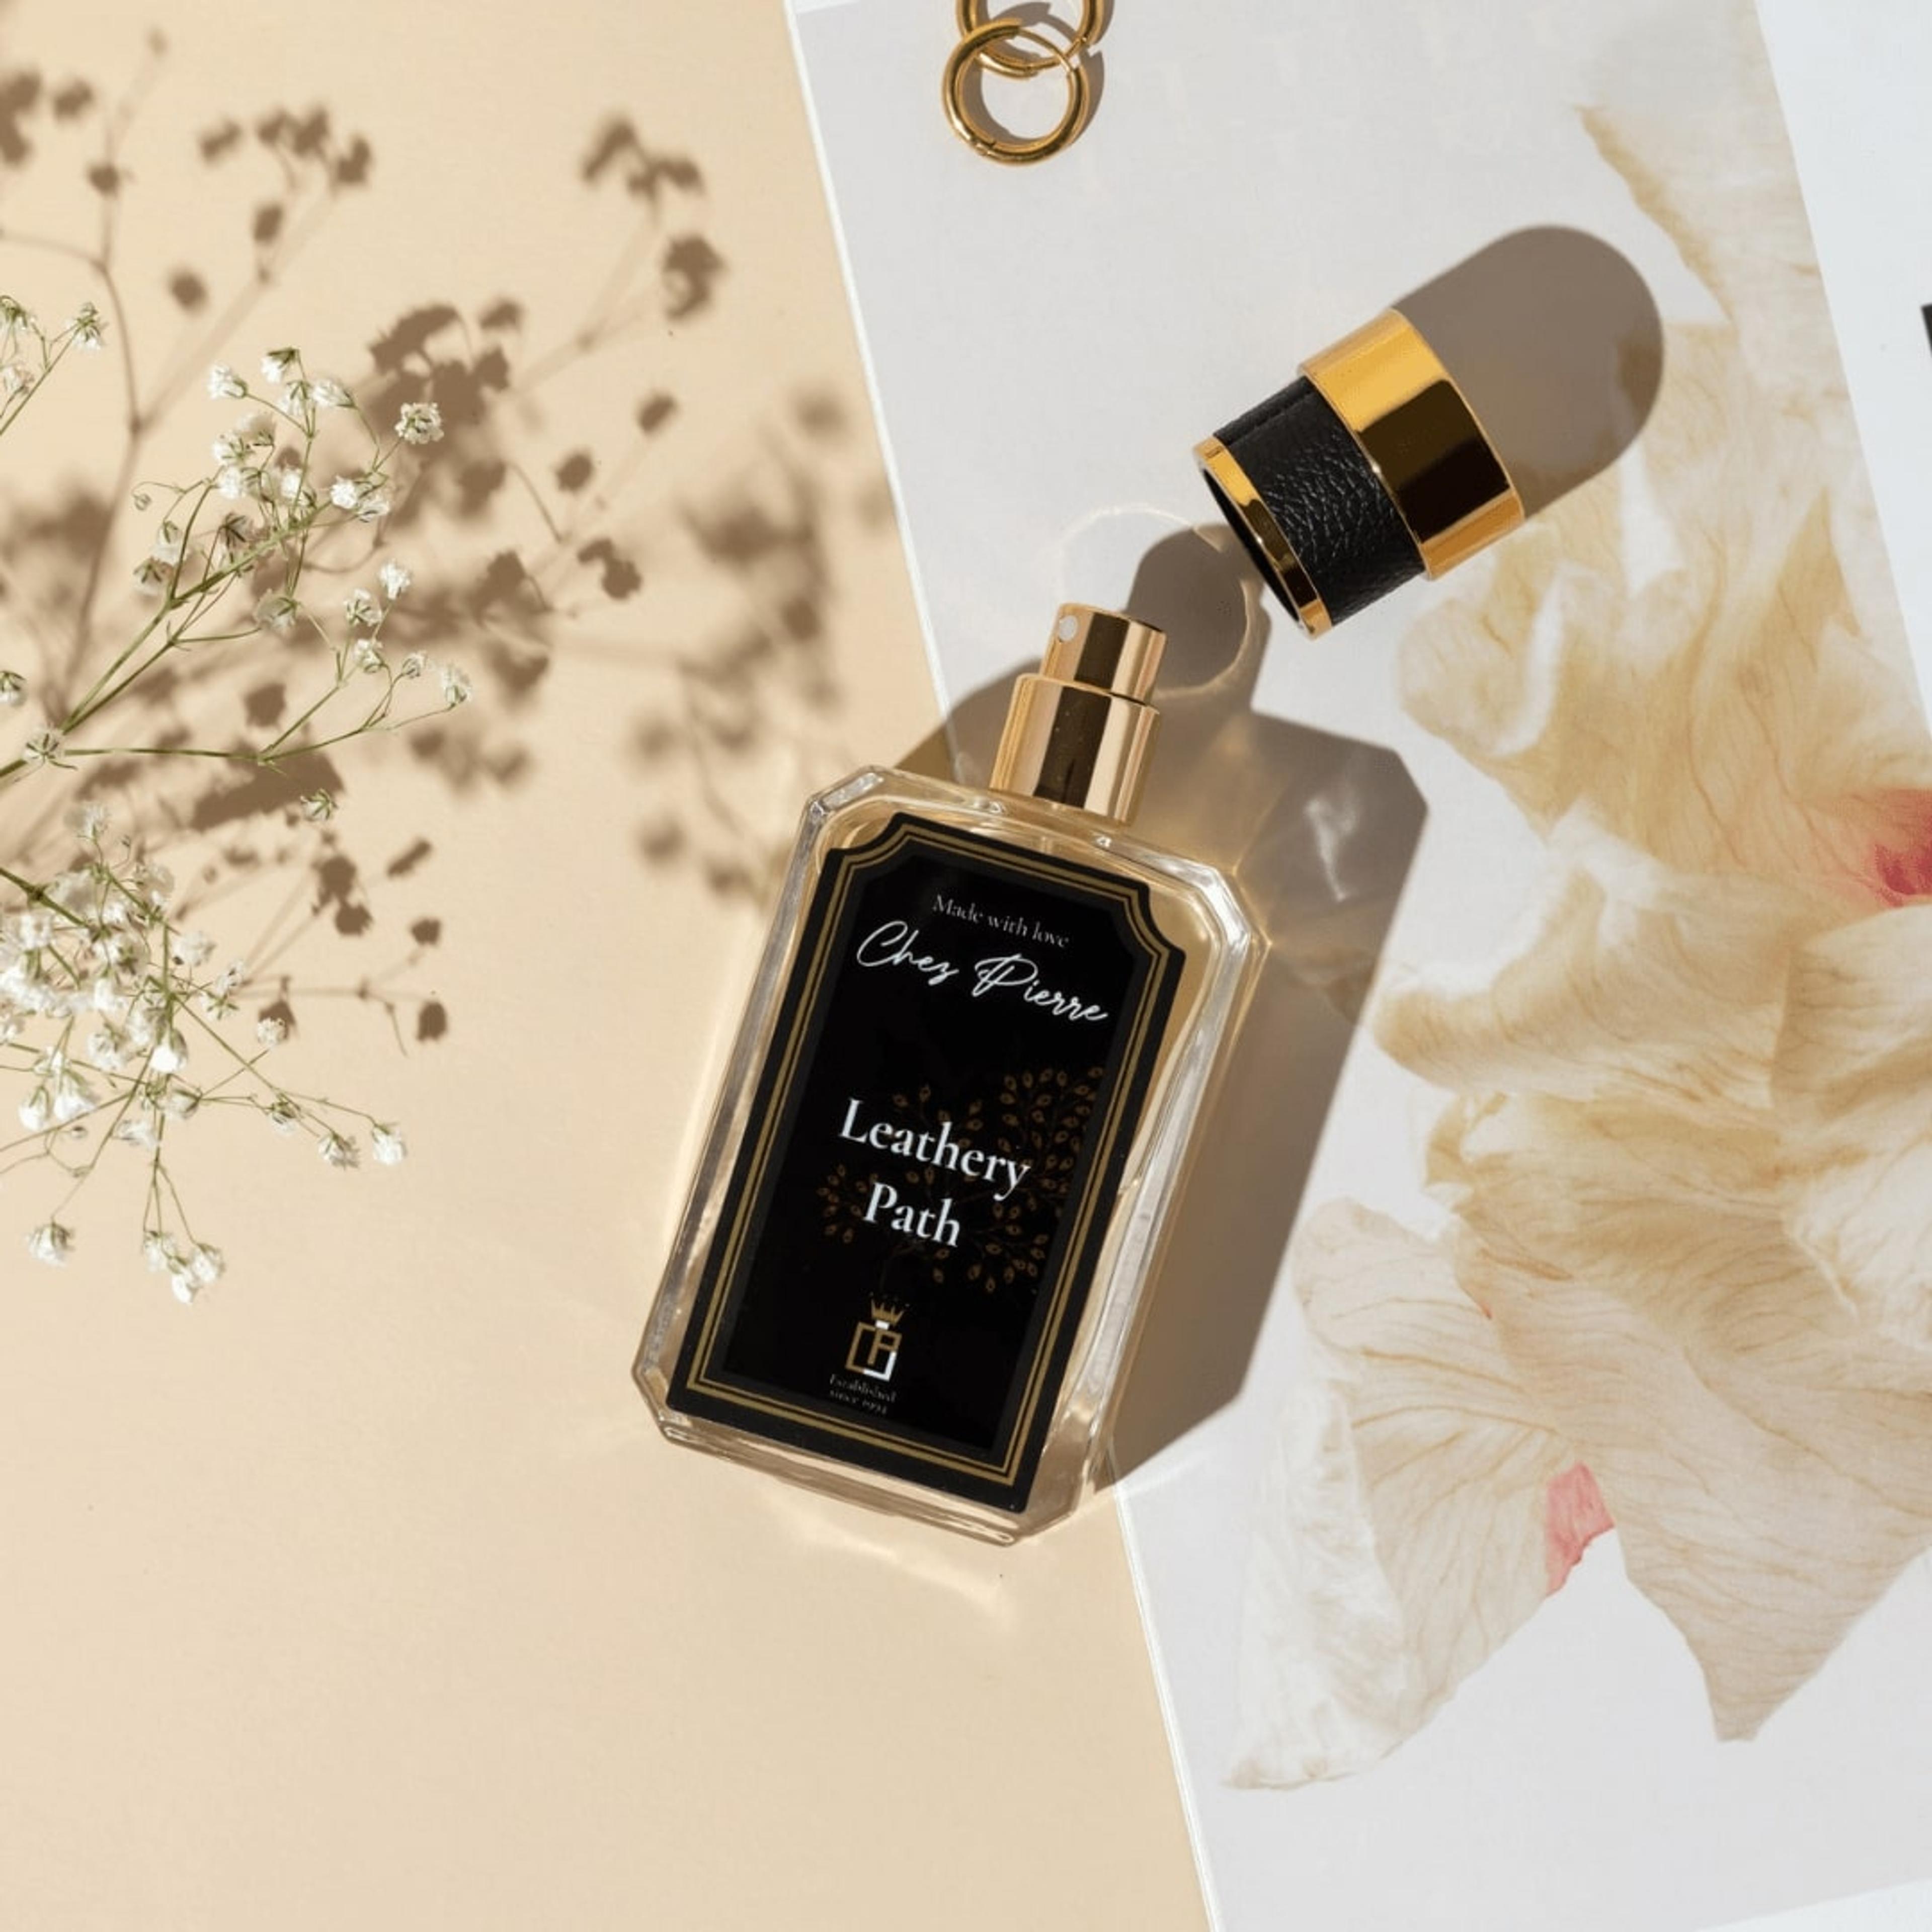 Chez Pierre's Leathery Path Perfume Inspired By Tuscan Leather